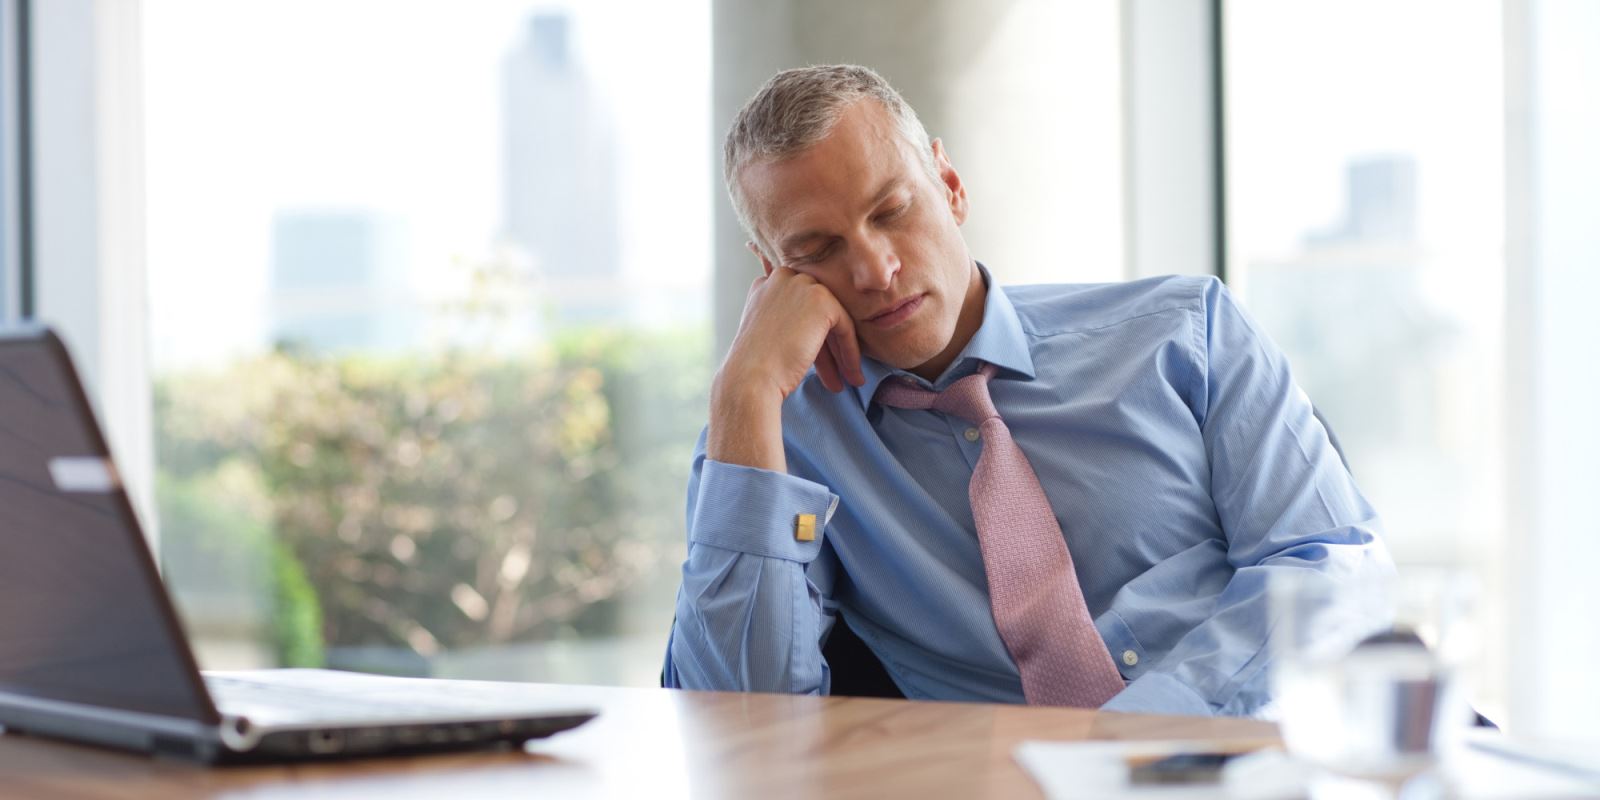 Should you discipline employees for being tired?